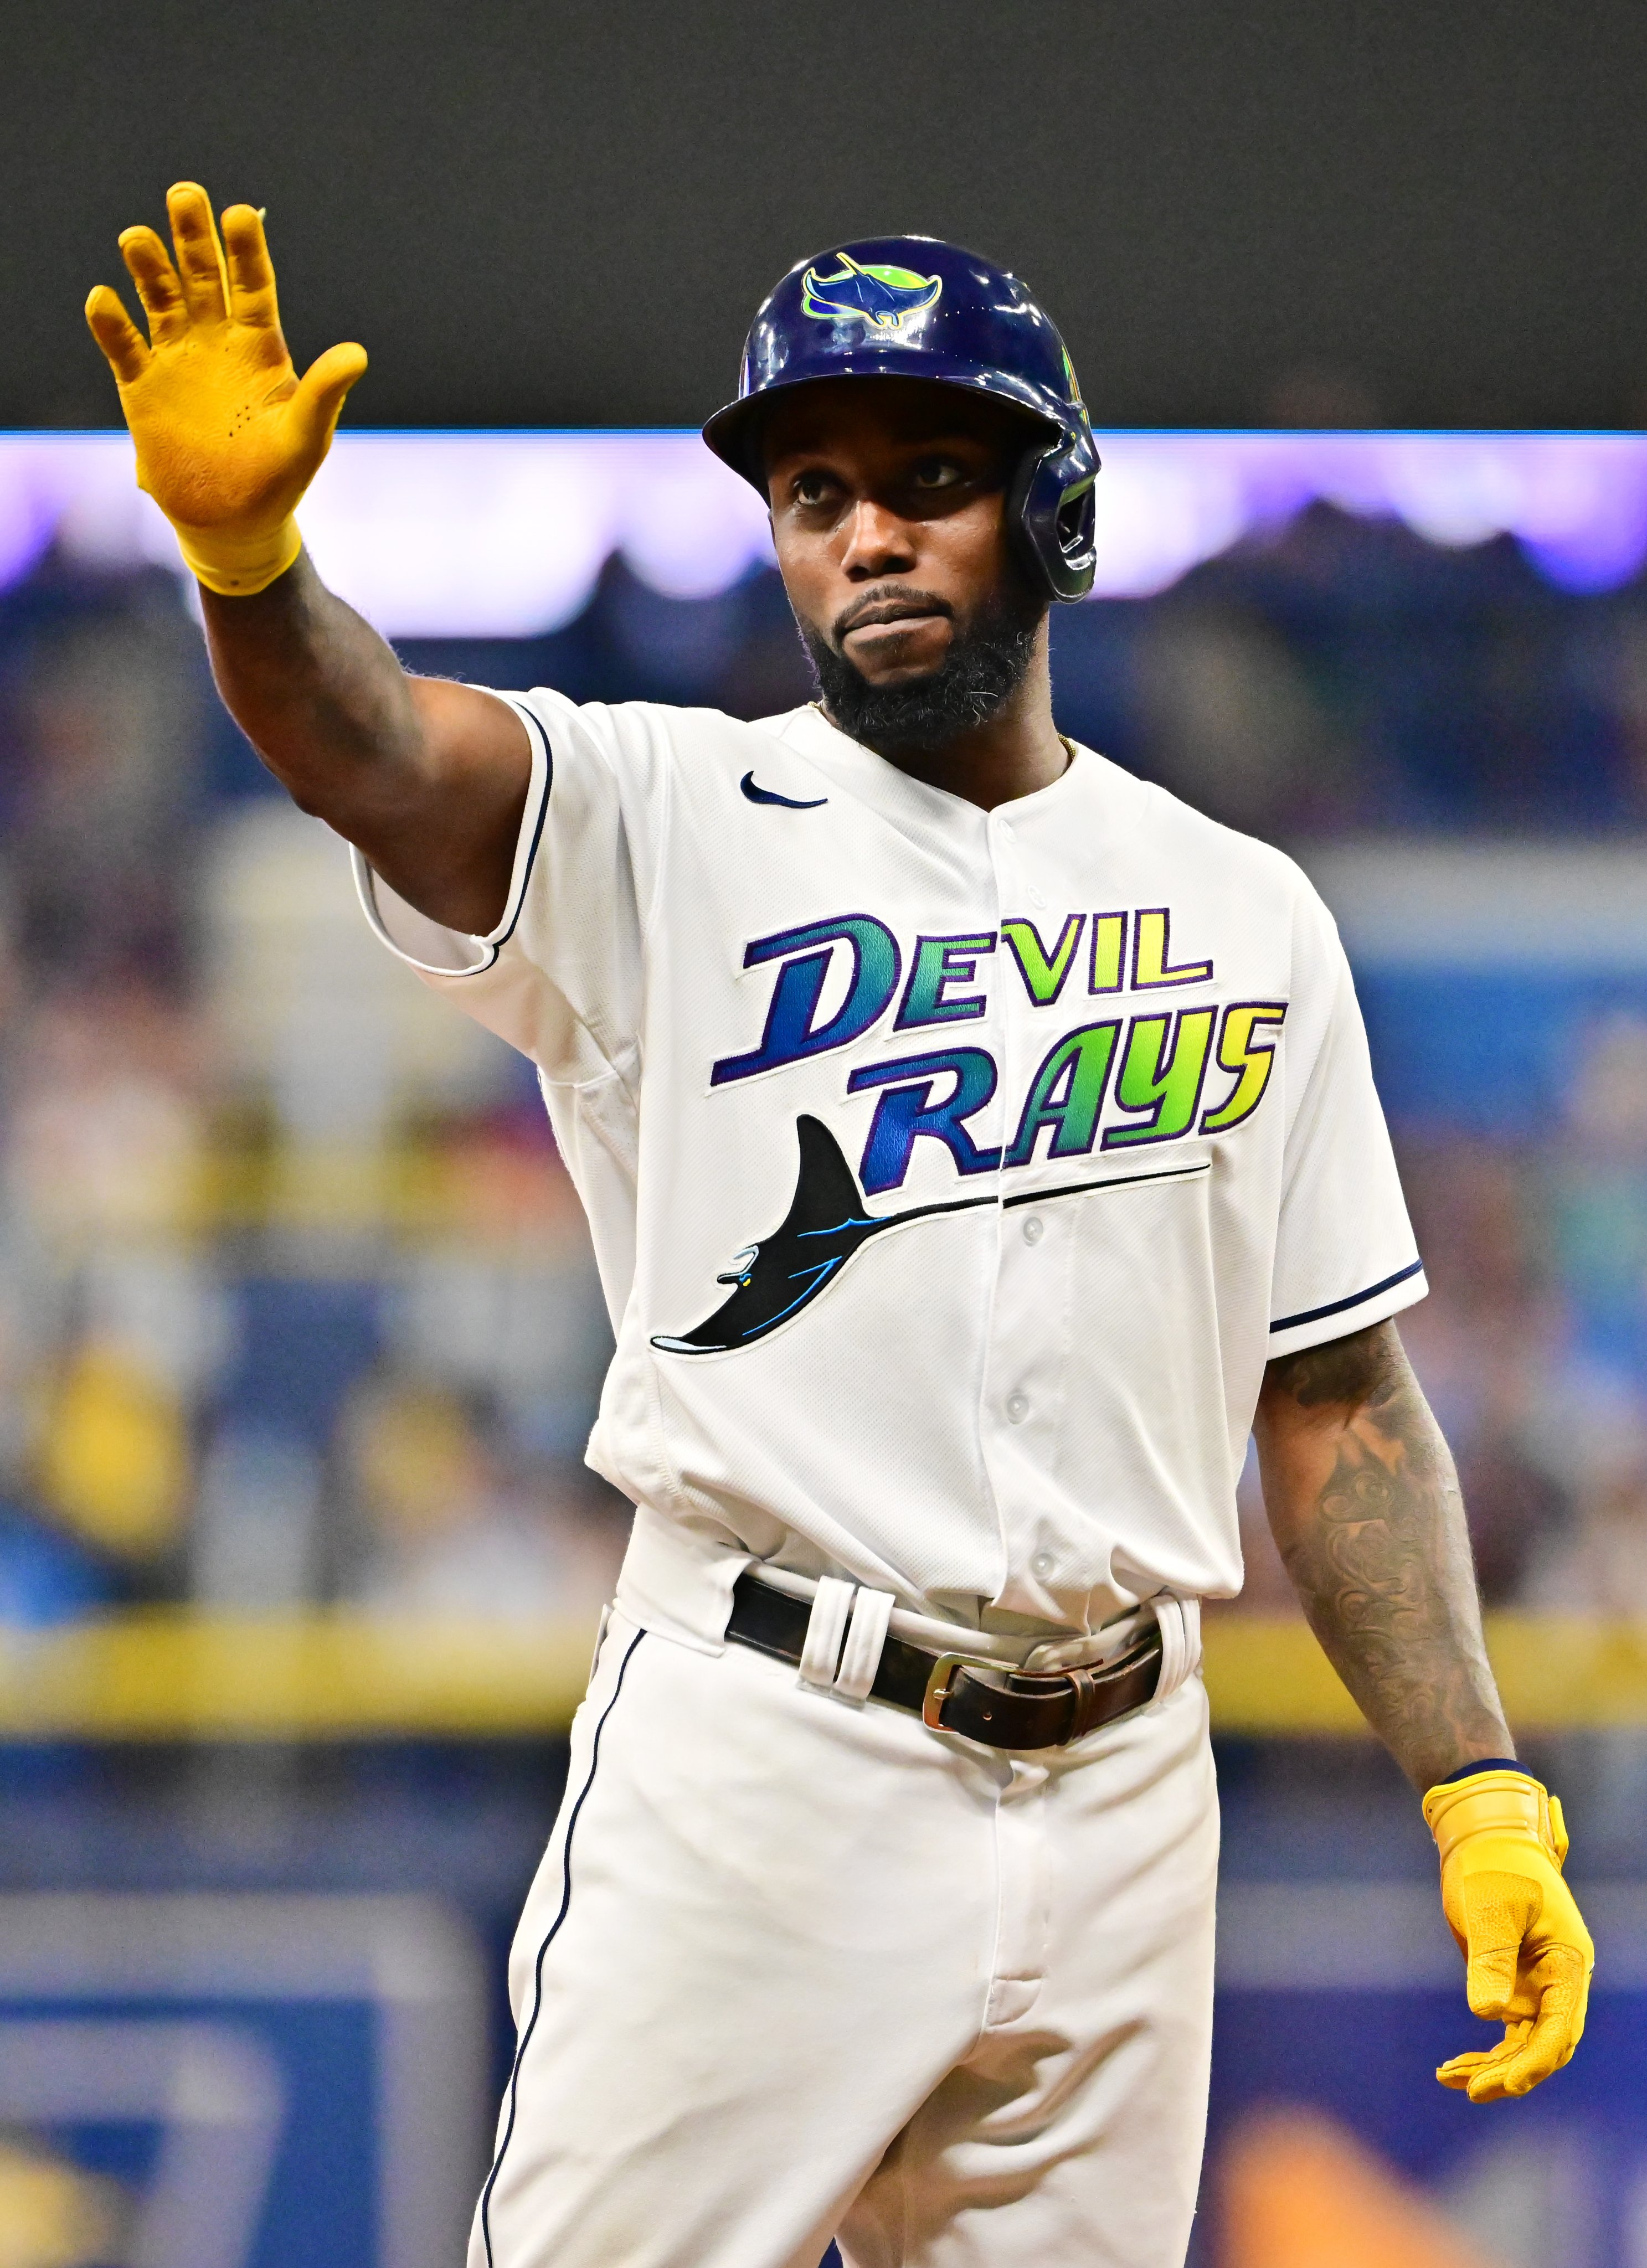 FOX Sports: MLB on X: The Rays announced they will wear their